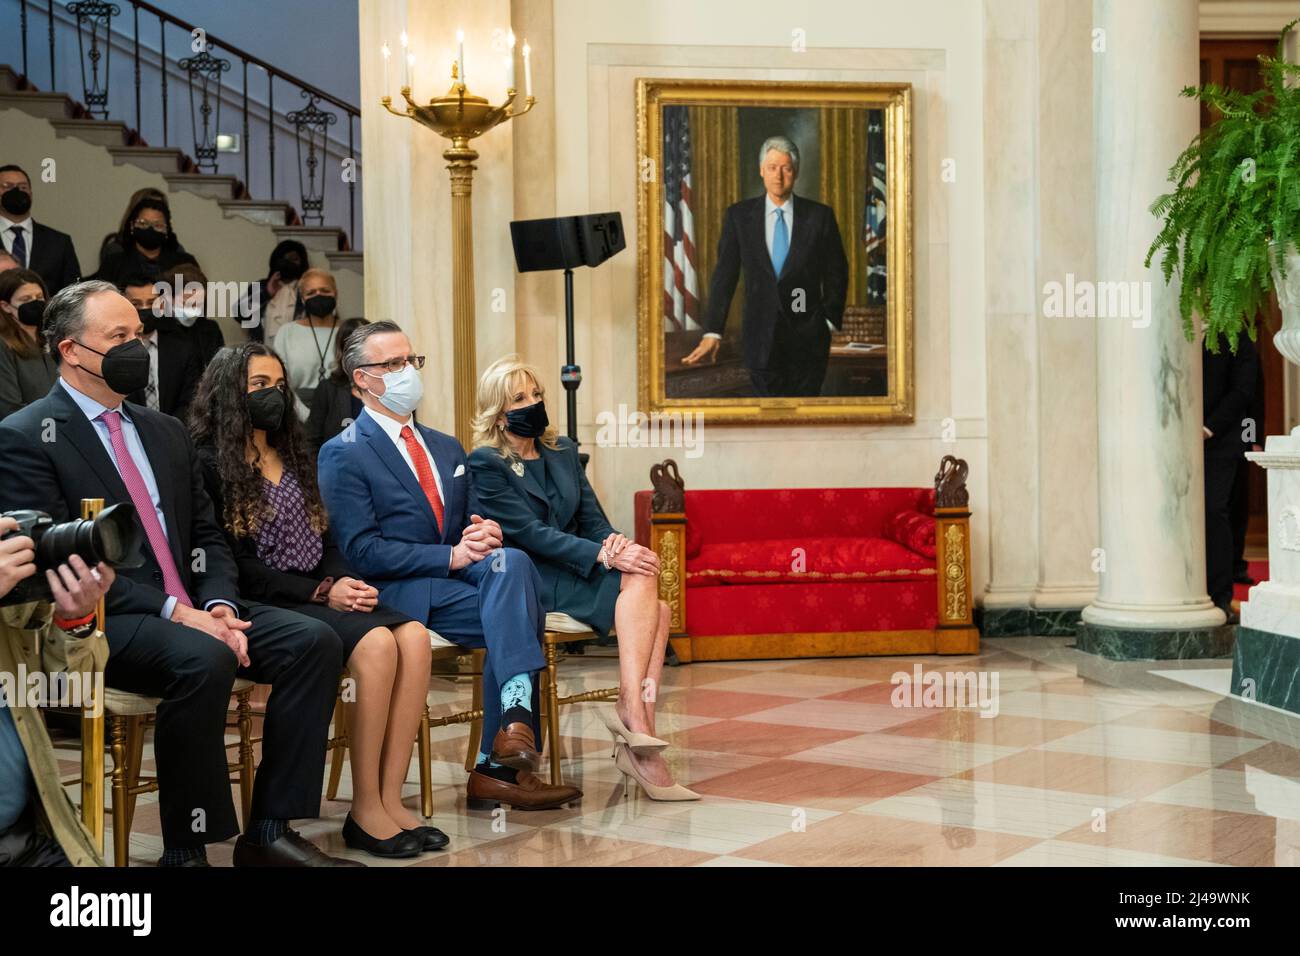 First Lady Jill Biden and Second Gentleman Doug Emhoff watch with Judge Ketanji Brown Jackson’s husband and daughter while President Joe Biden delivers remarks on Judge Jackson’s nomination to the U.S. Supreme Court, Friday, February 25, 2022, in the Grand Foyer of the White House. (Official White House Photo by Adam Schultz) Stock Photo